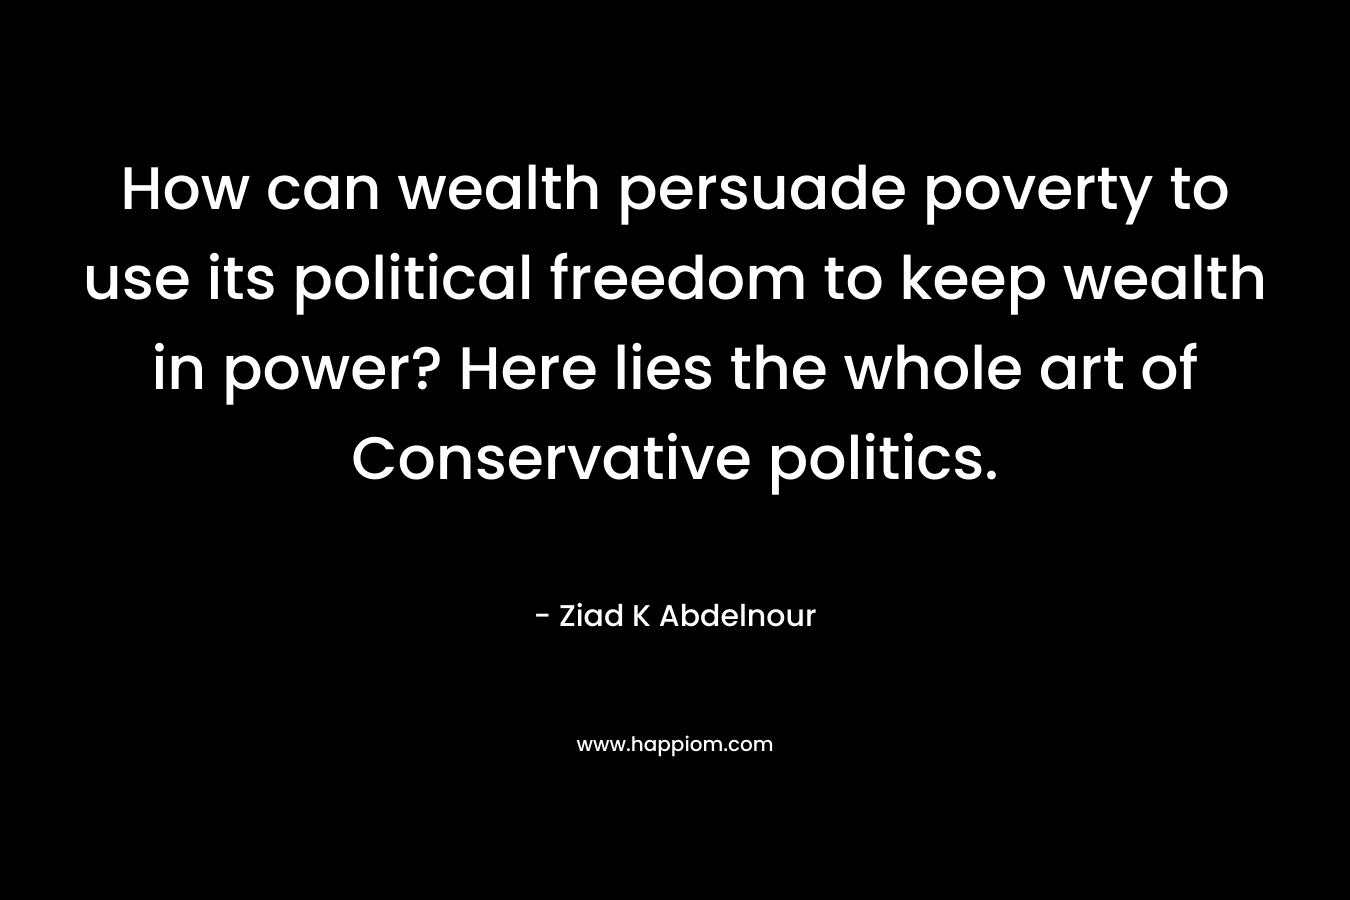 How can wealth persuade poverty to use its political freedom to keep wealth in power? Here lies the whole art of Conservative politics.